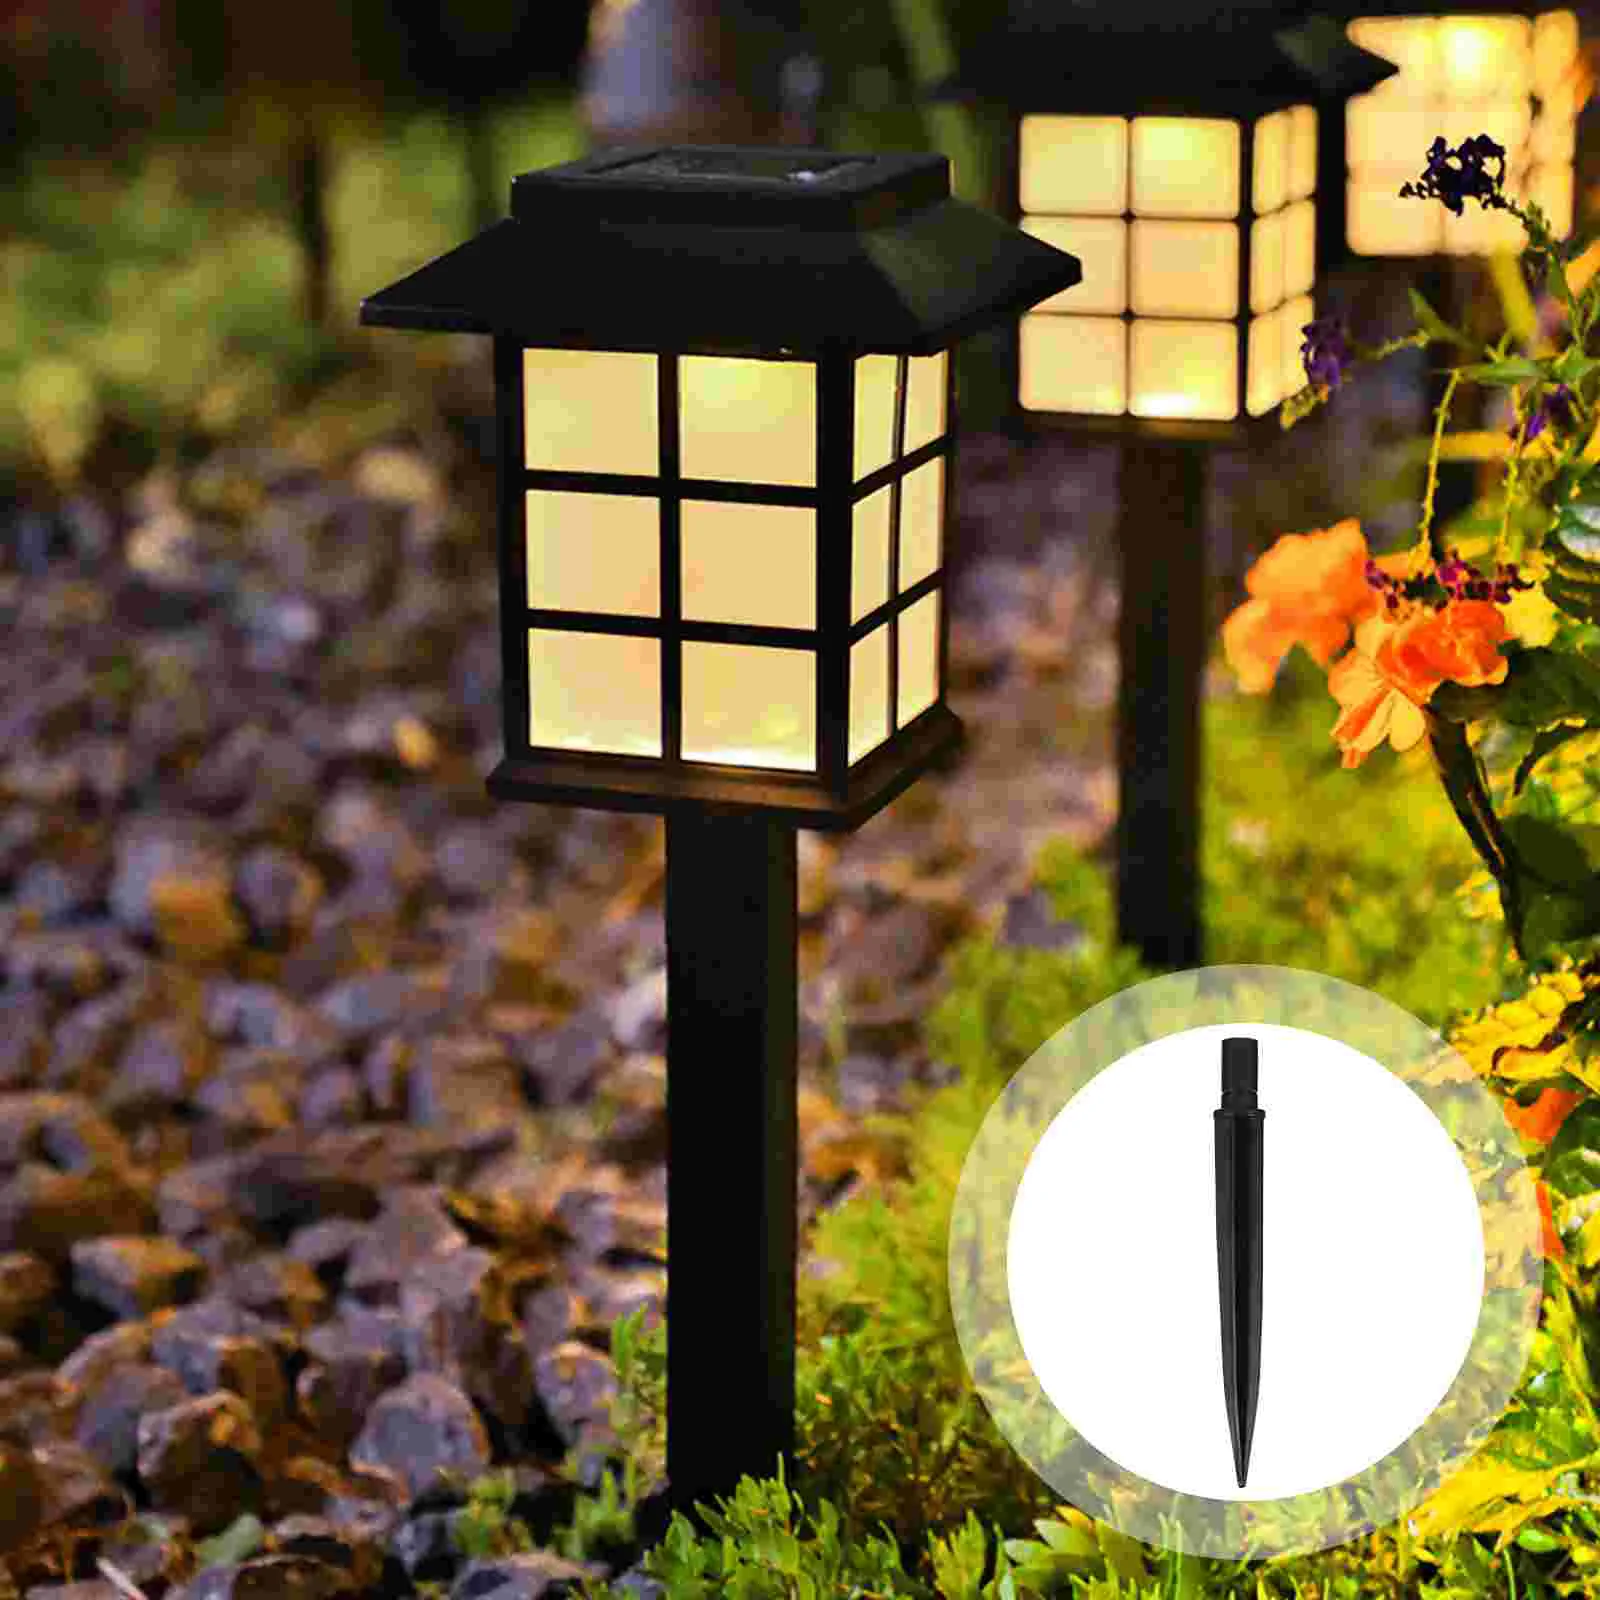 

Lights Spikes Stakes Light Ground Solar Replacement Spike Gardenfor Pathway Torch Stake Lamp Lawn Landscape Outdoor Yard Plug